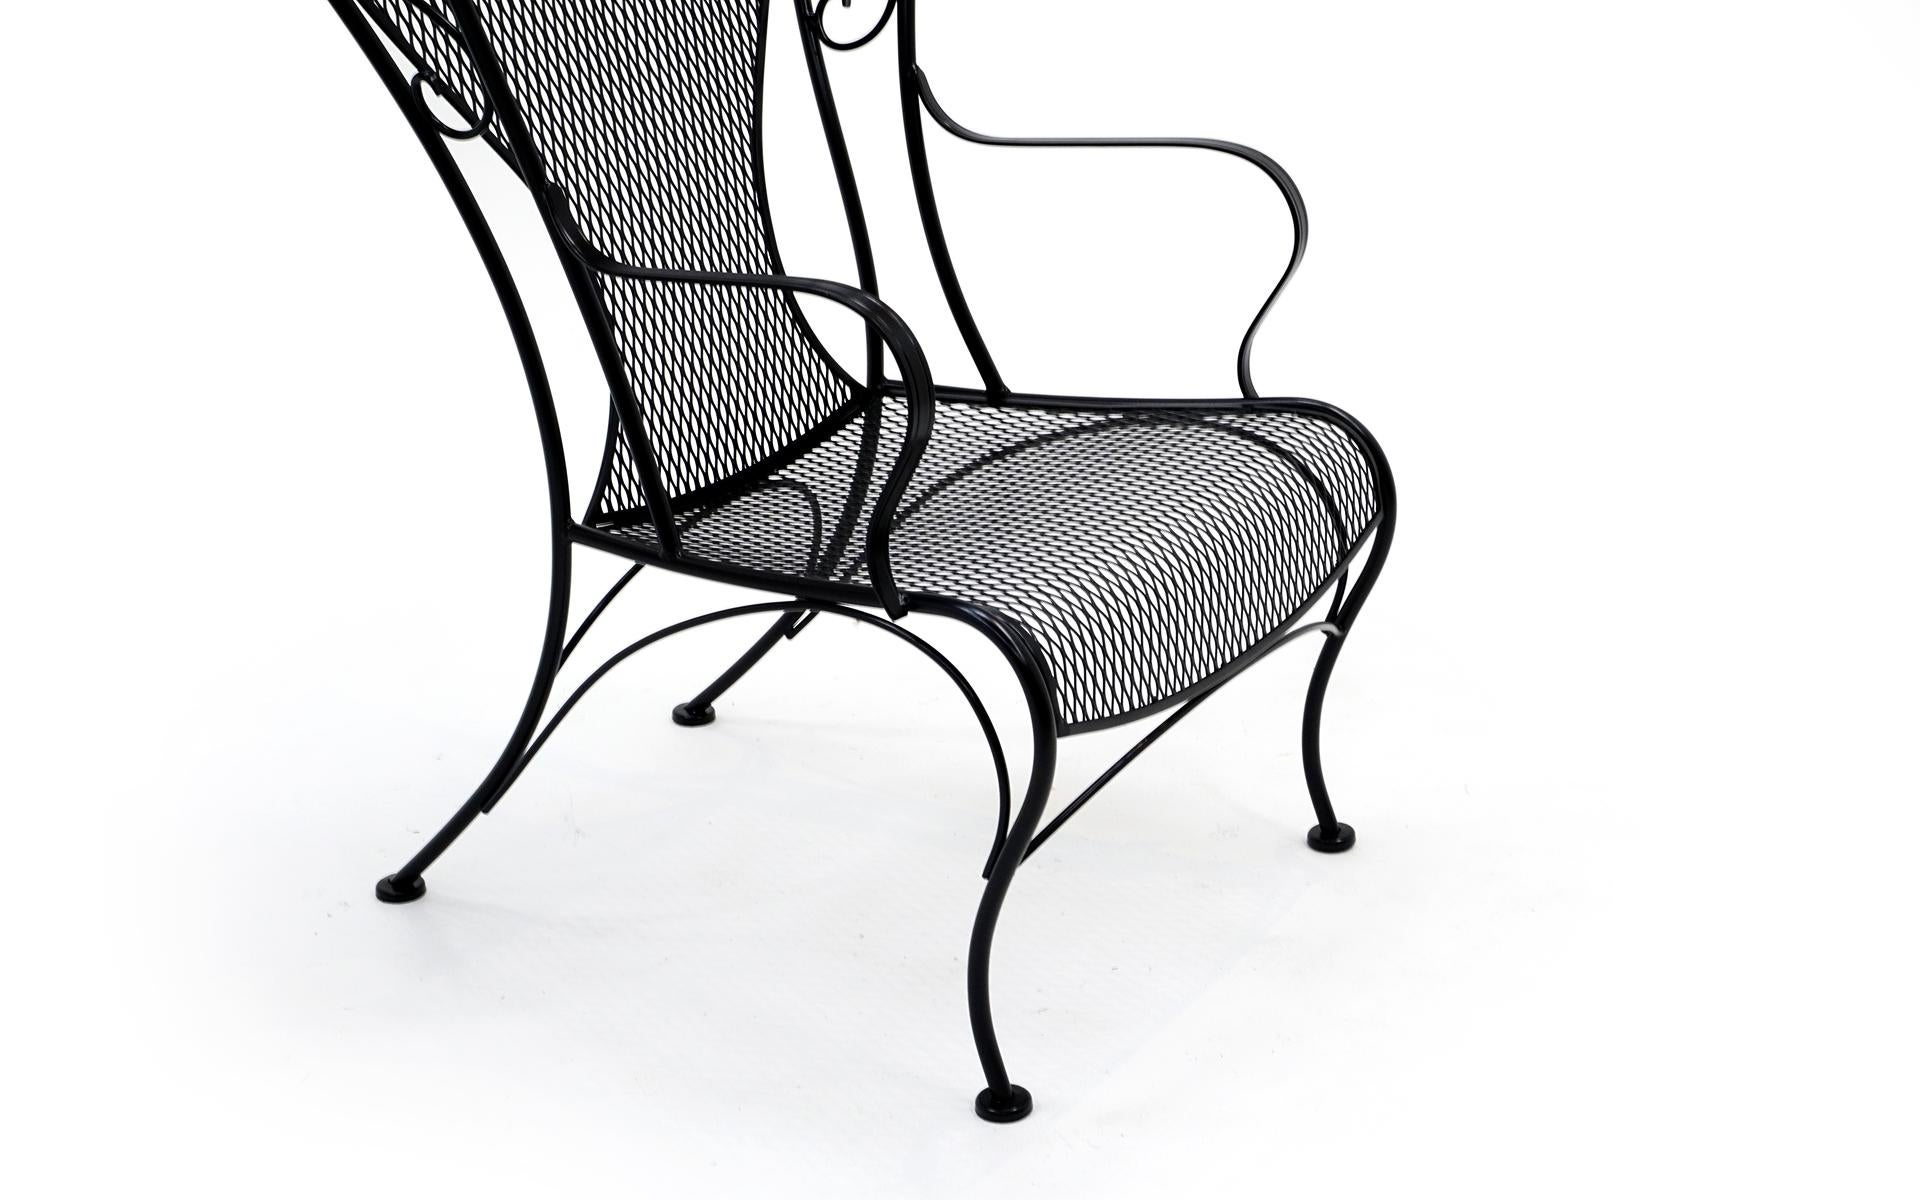 Steel Pair of High Back Outdoor Canopy Chairs by Russell Woodard Satin Black Excellent